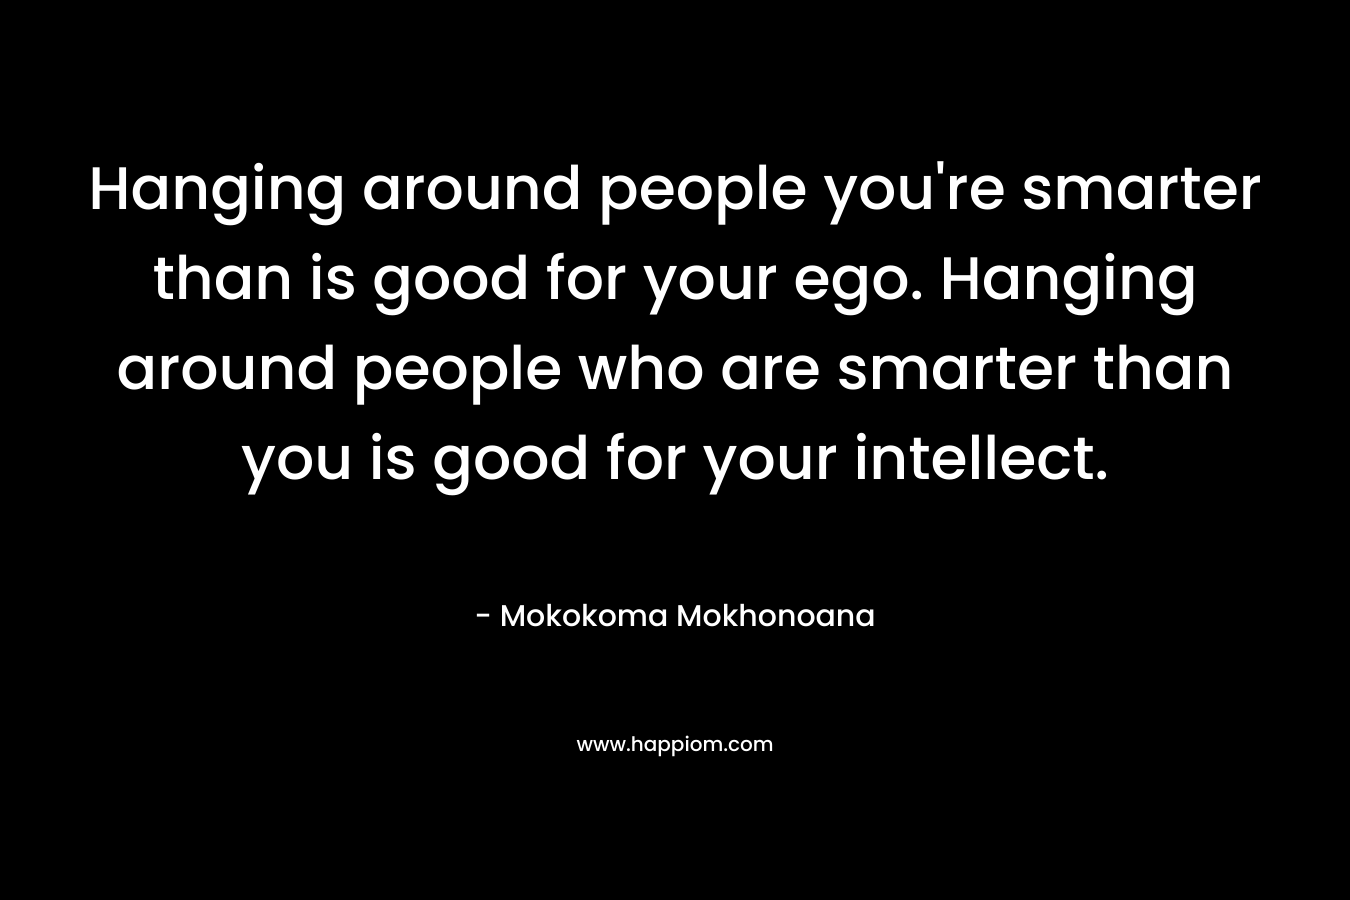 Hanging around people you're smarter than is good for your ego. Hanging around people who are smarter than you is good for your intellect.